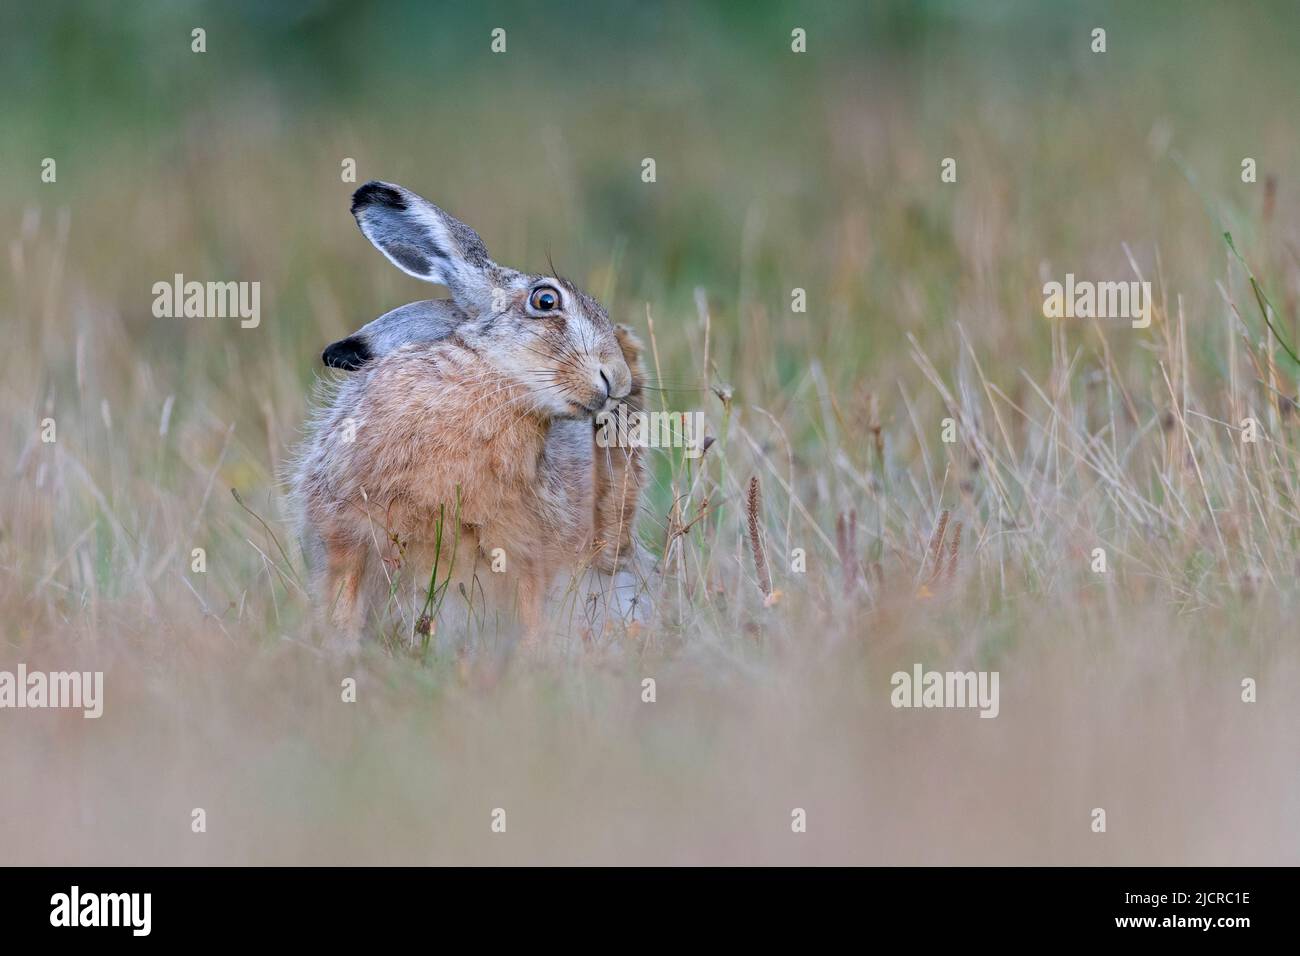 European Brown Hare (Lepus europaeus). With the paw from the hind leg the hare can reach even hard to reach parts of the body for scratching Germany Stock Photo